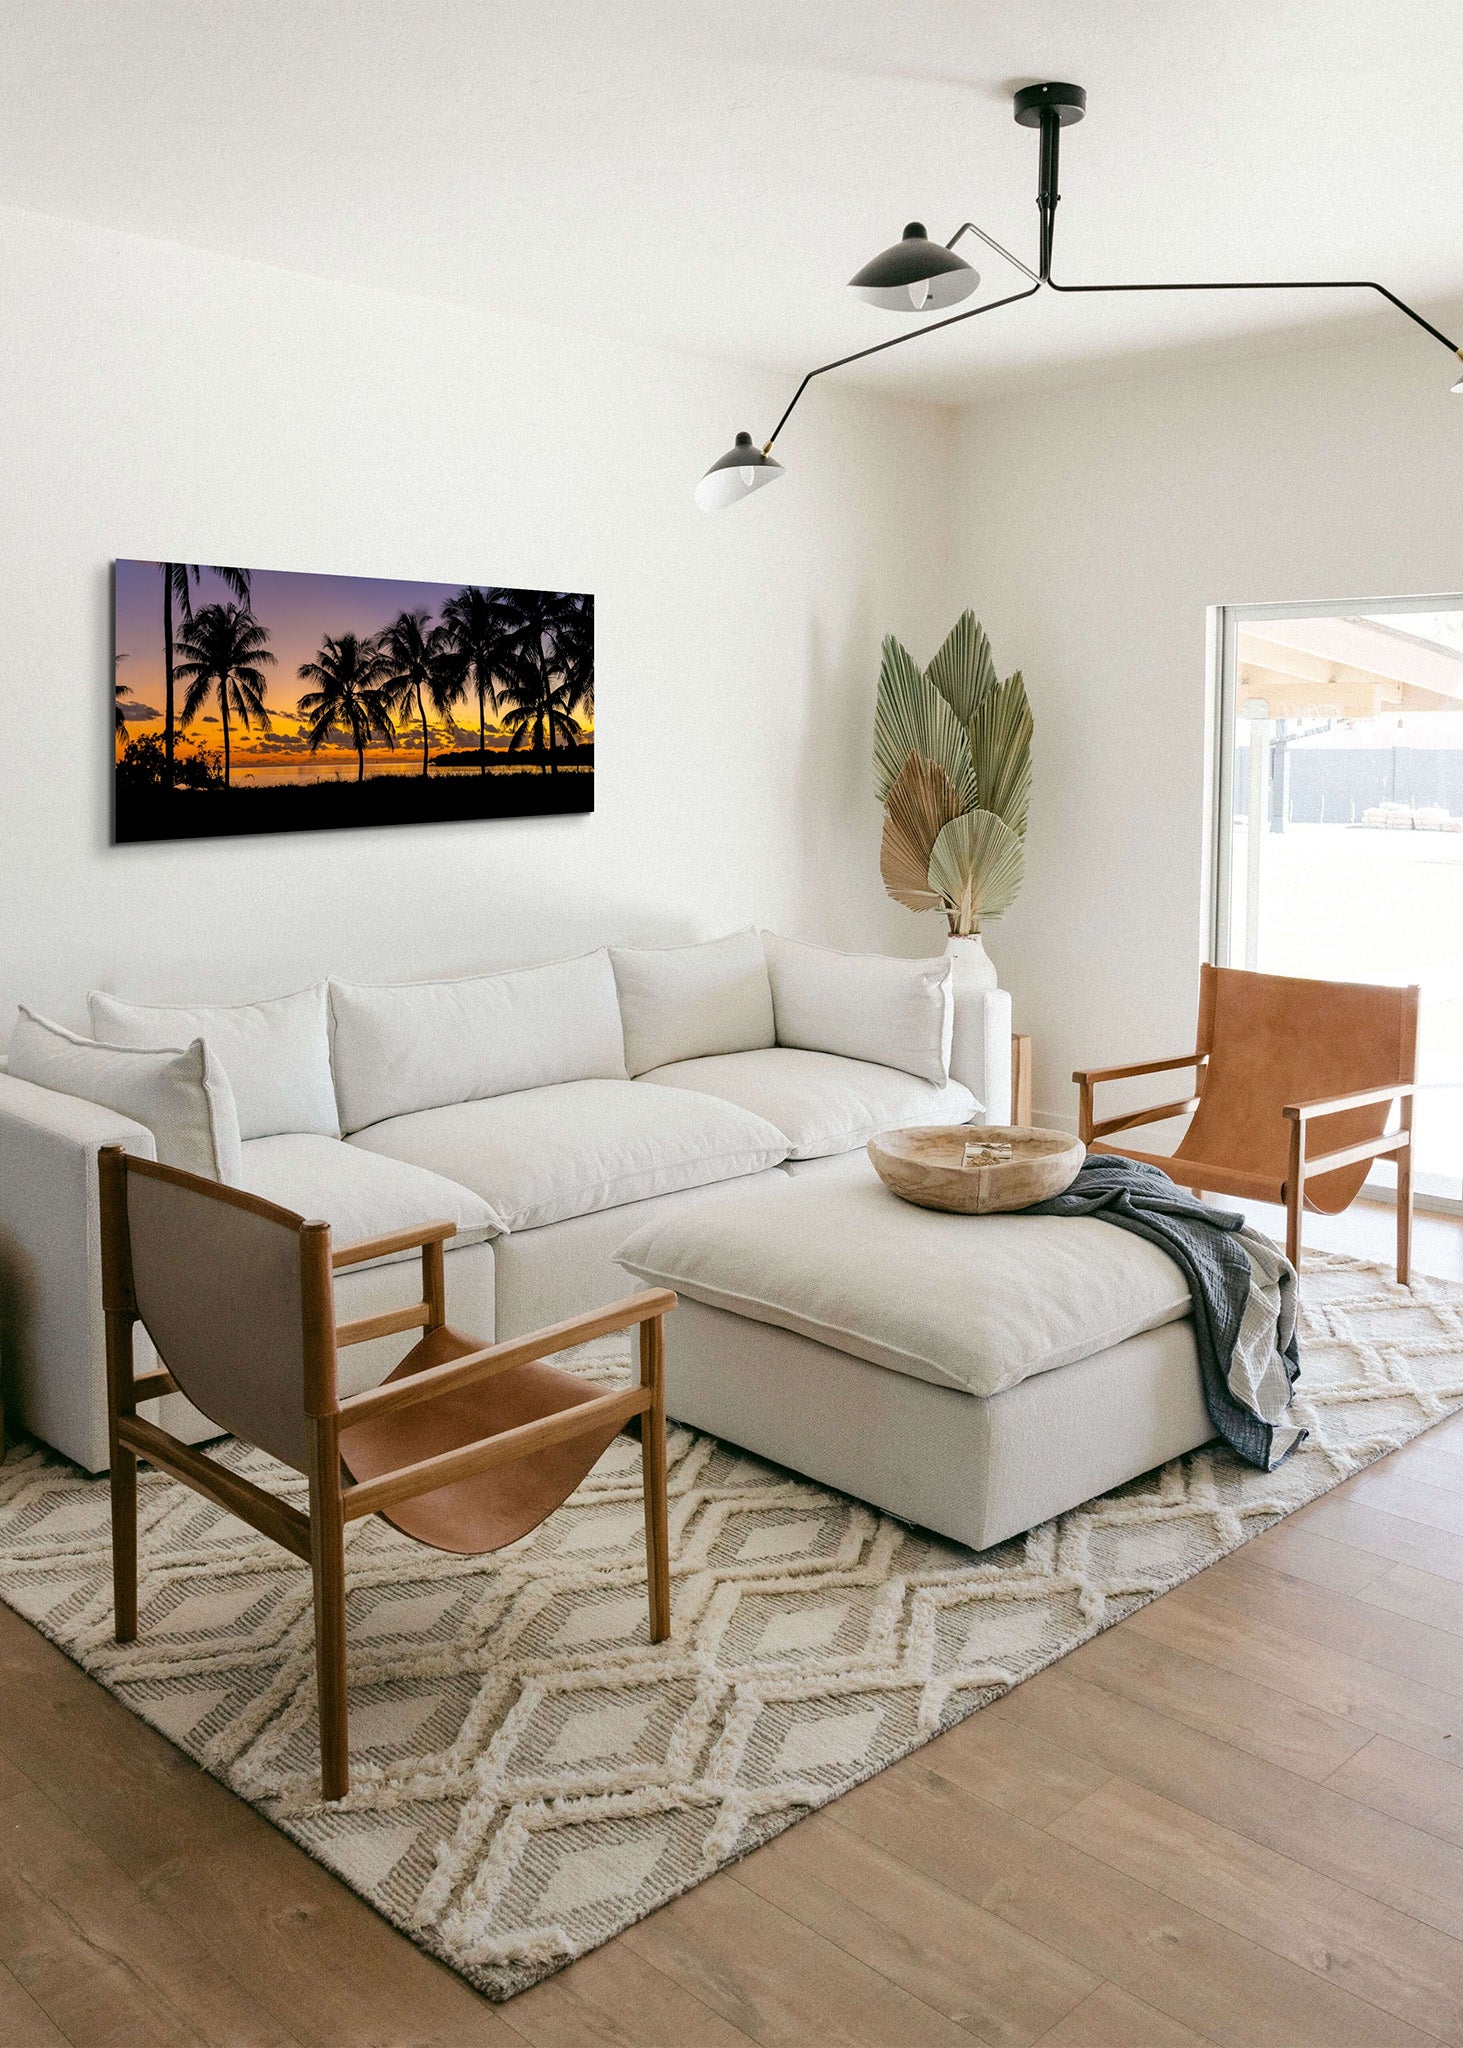 Picture hanging on the wall of a living room over a white sofa. The picture is a fine art landscape photograph titled "Nautical Twilight" by Cameron Dreaux of Dreaux Fine Art.